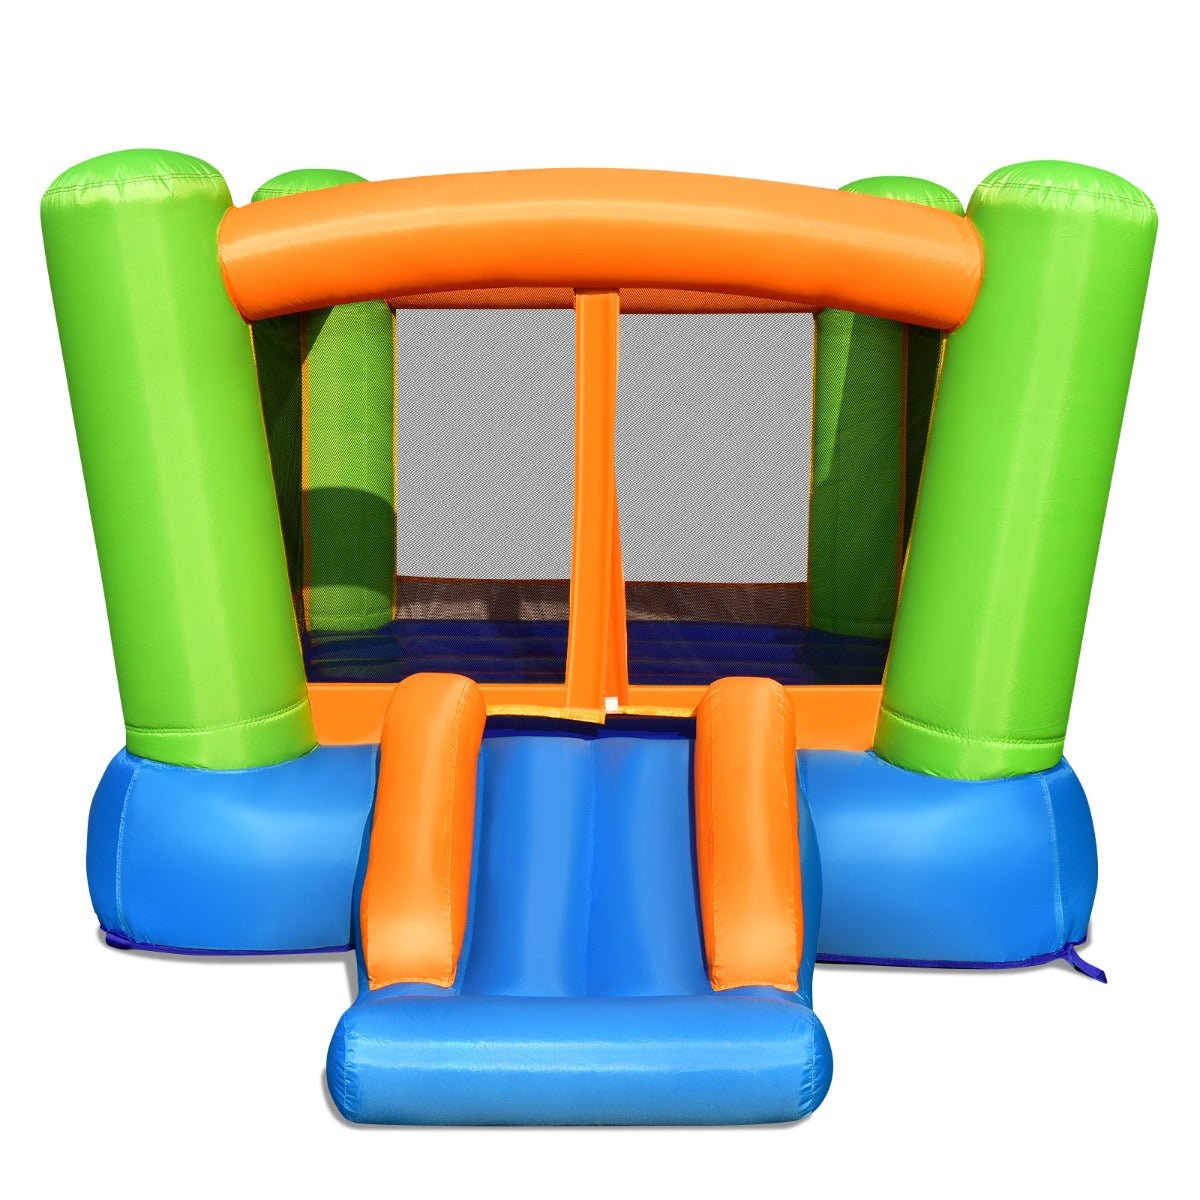 Inflatable Play Structure - Slide & Jumping Zone (No Air Blower)